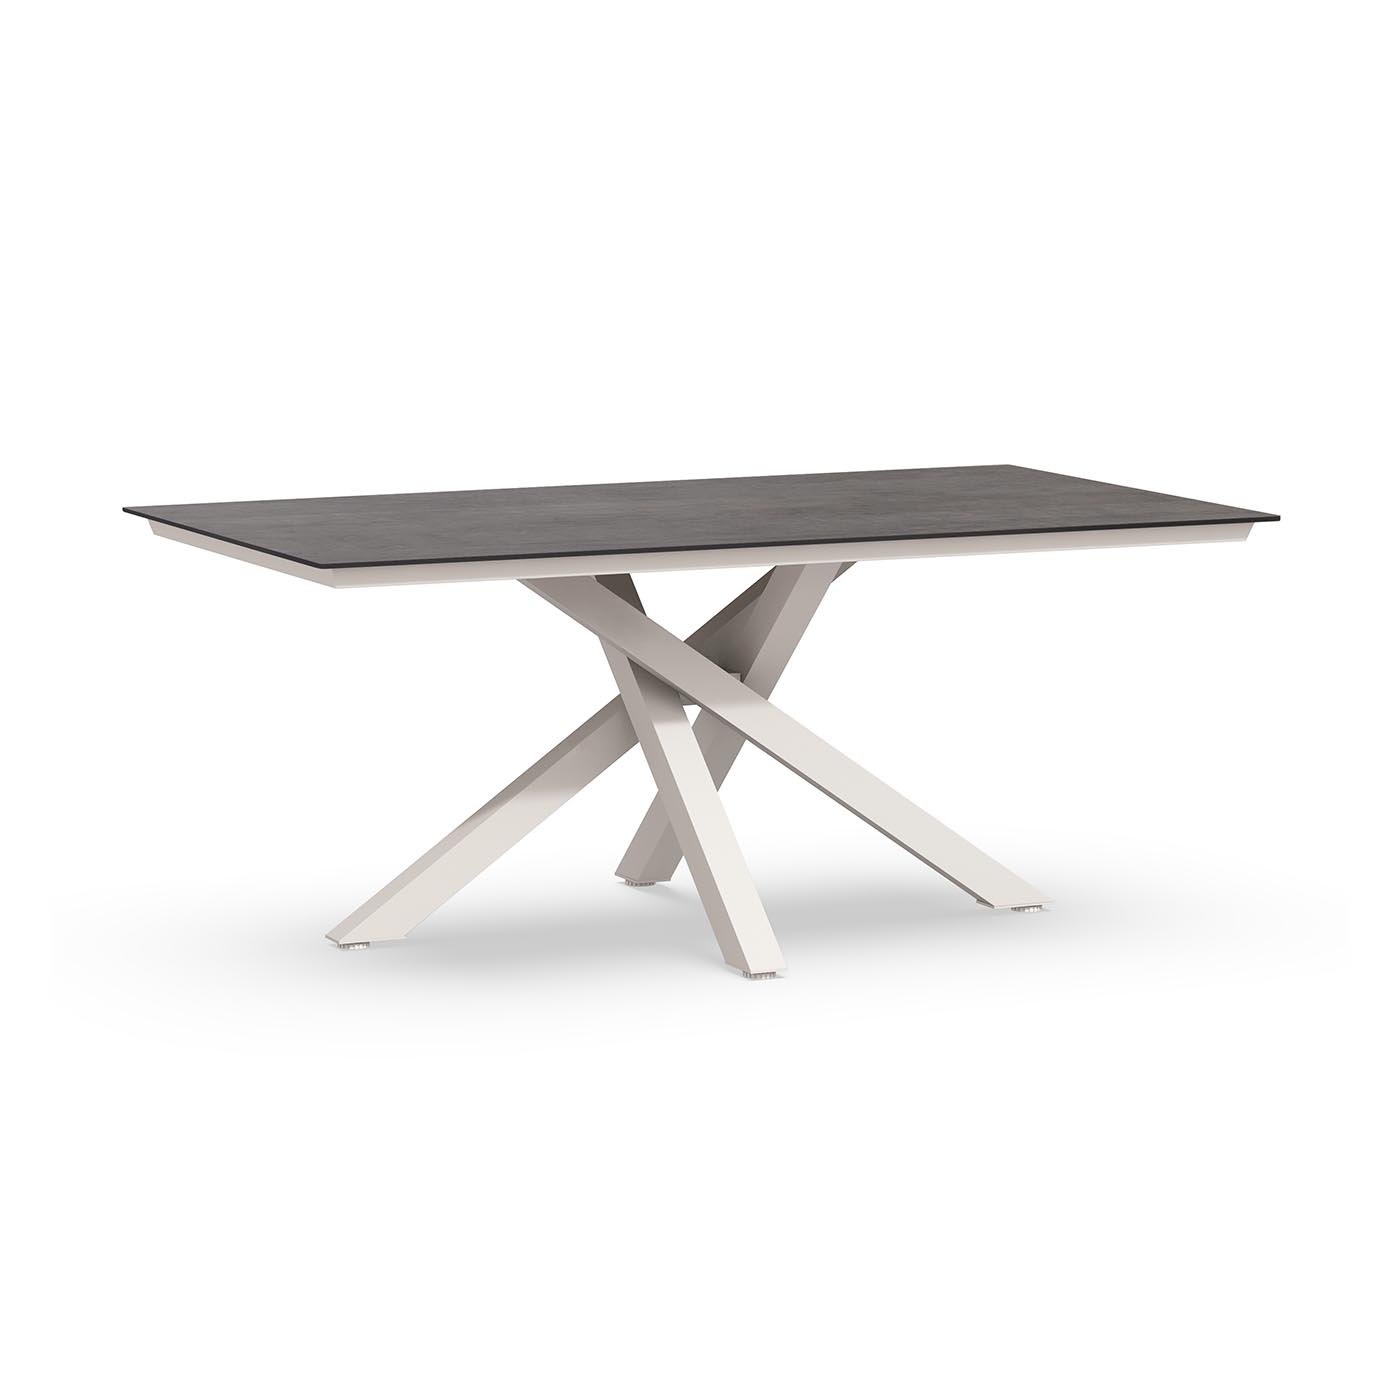 Orion Dining Table Trespa Forest Grey 180 x 100 cm Creme White